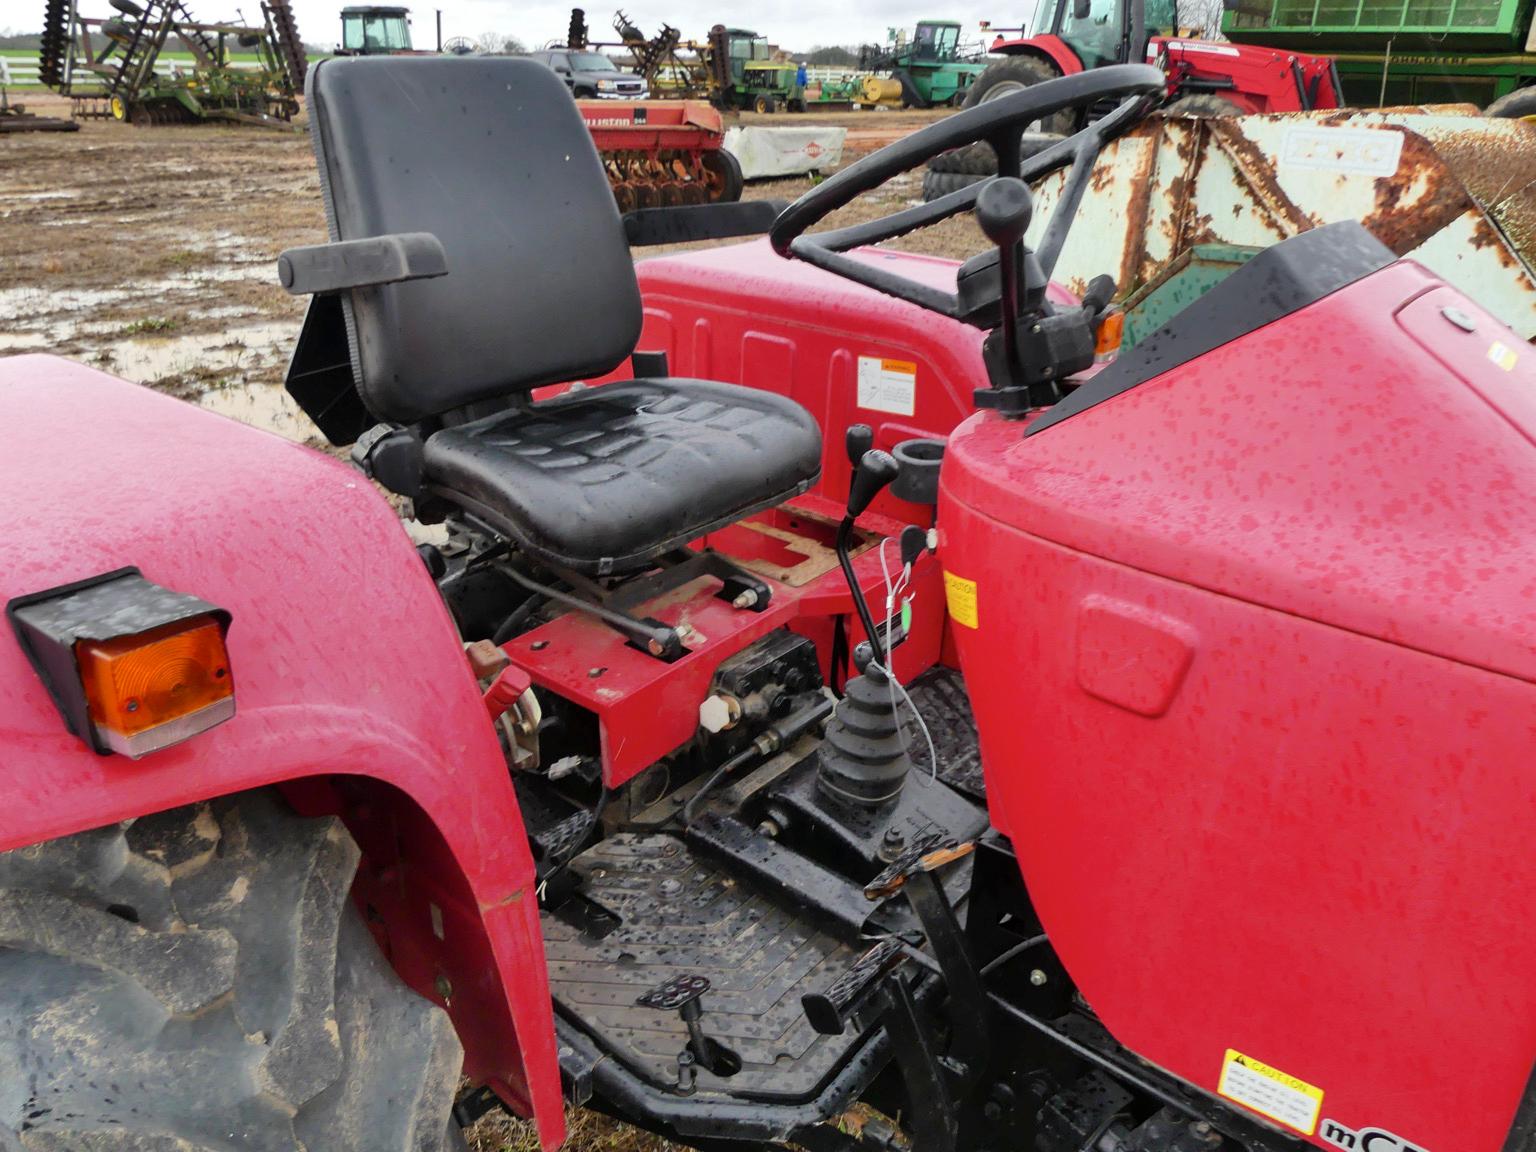 2015 Mahindra 4540 Tractor, s/n MBCNY1772: 2wd, Canopy, Meter Shows 219 hrs